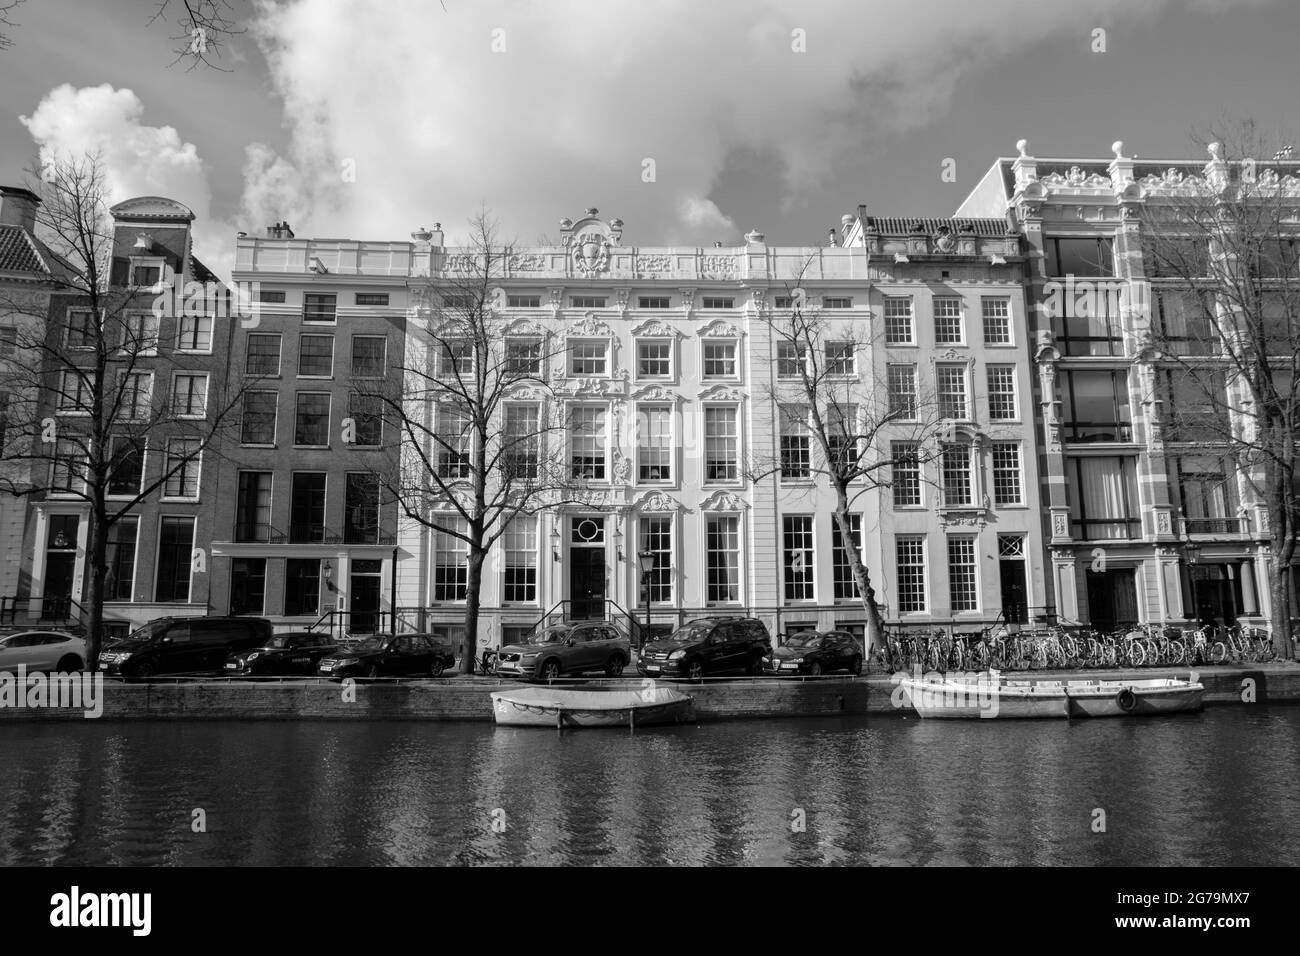 Keizergracht 452 Canal House At Amsterdam The Netherlands 4-3-2020 Stock Photo